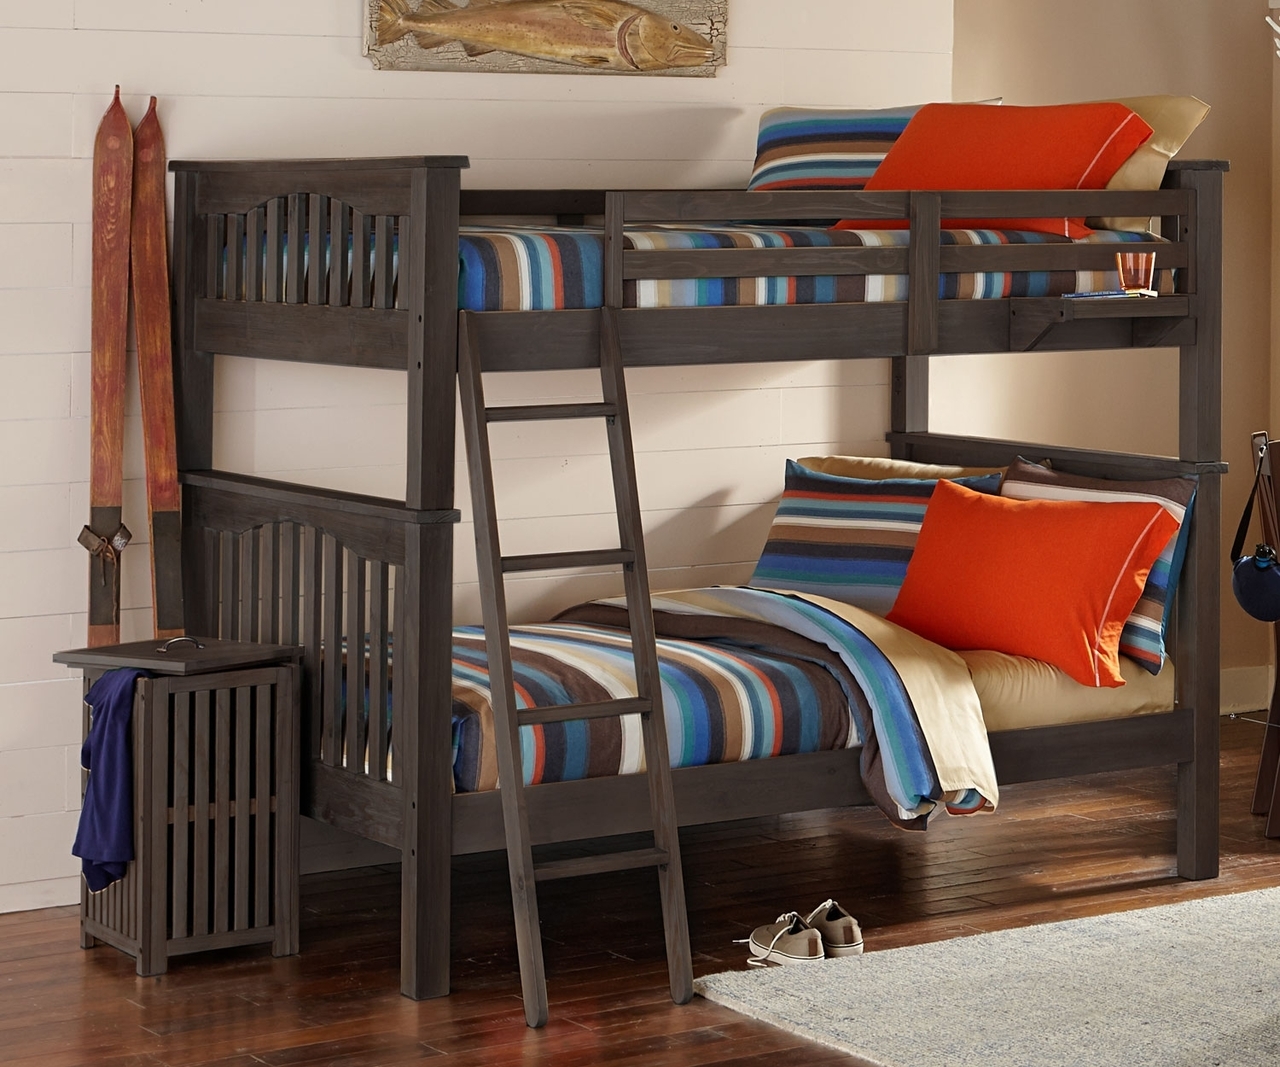 Full Over Bunk Beds For Under 1, Bunk Beds For Less Than 100